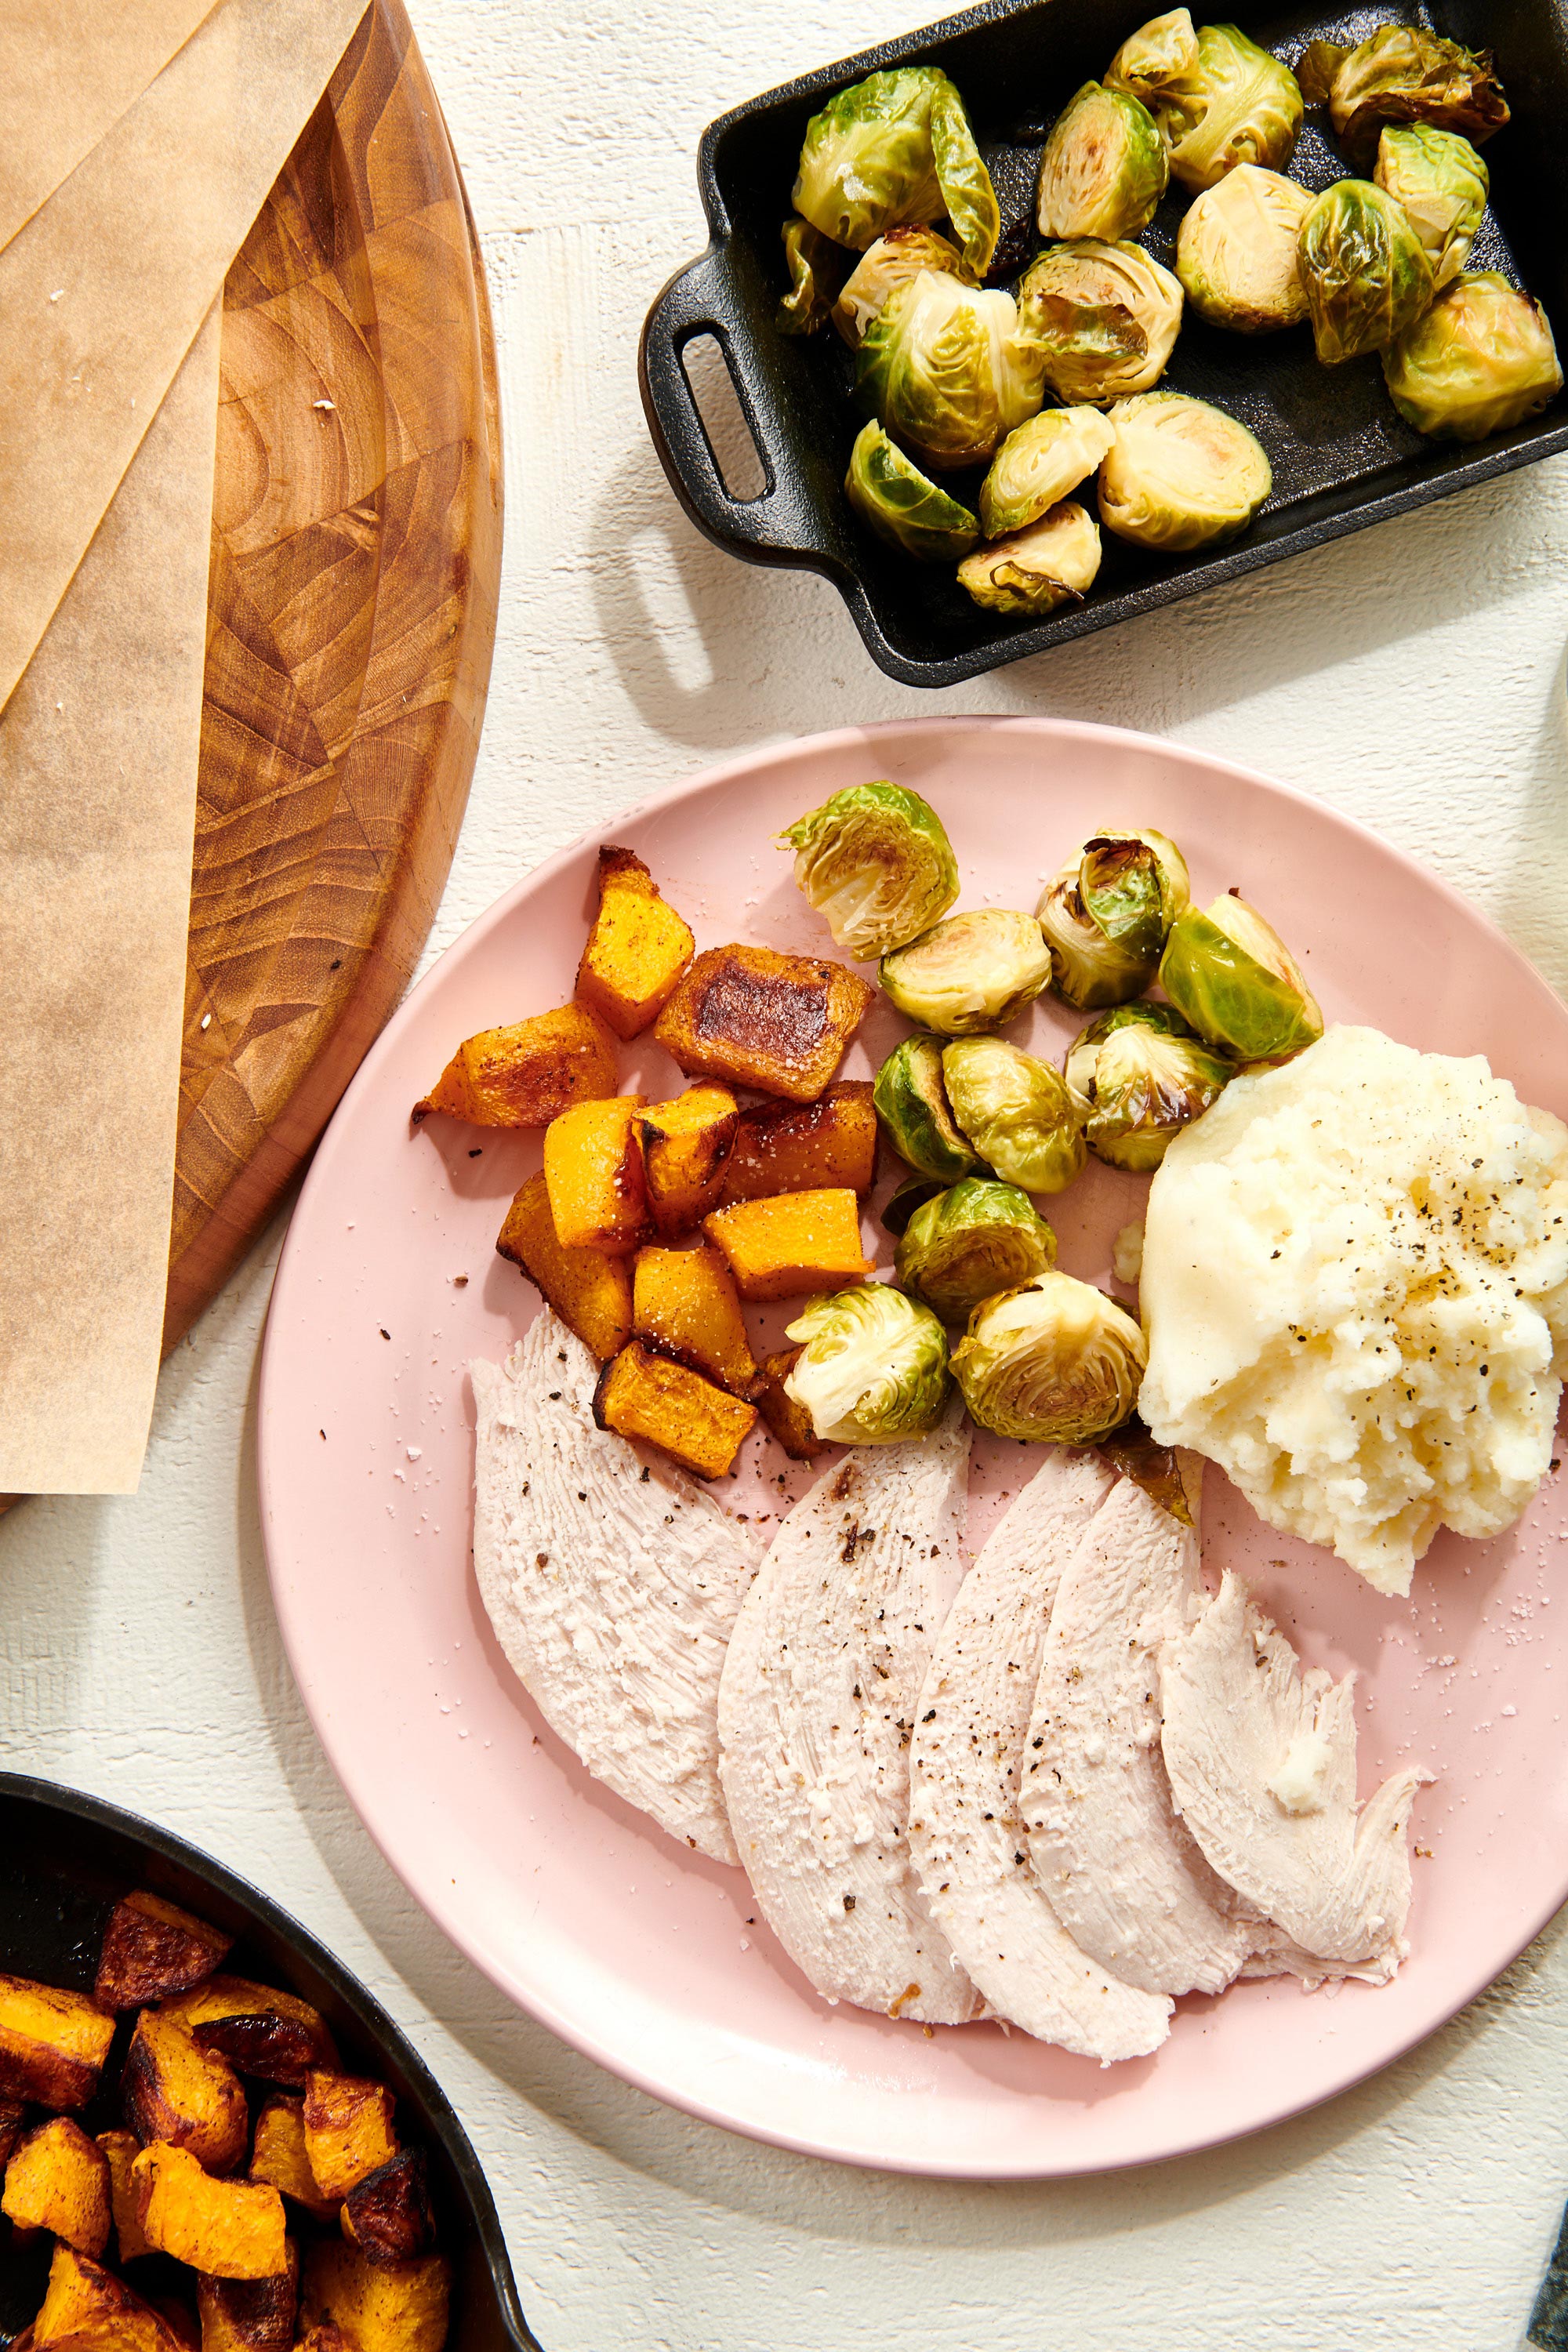 Slow Cooker Turkey Breast with Brussels sprouts and butternut squash on a pink plate.